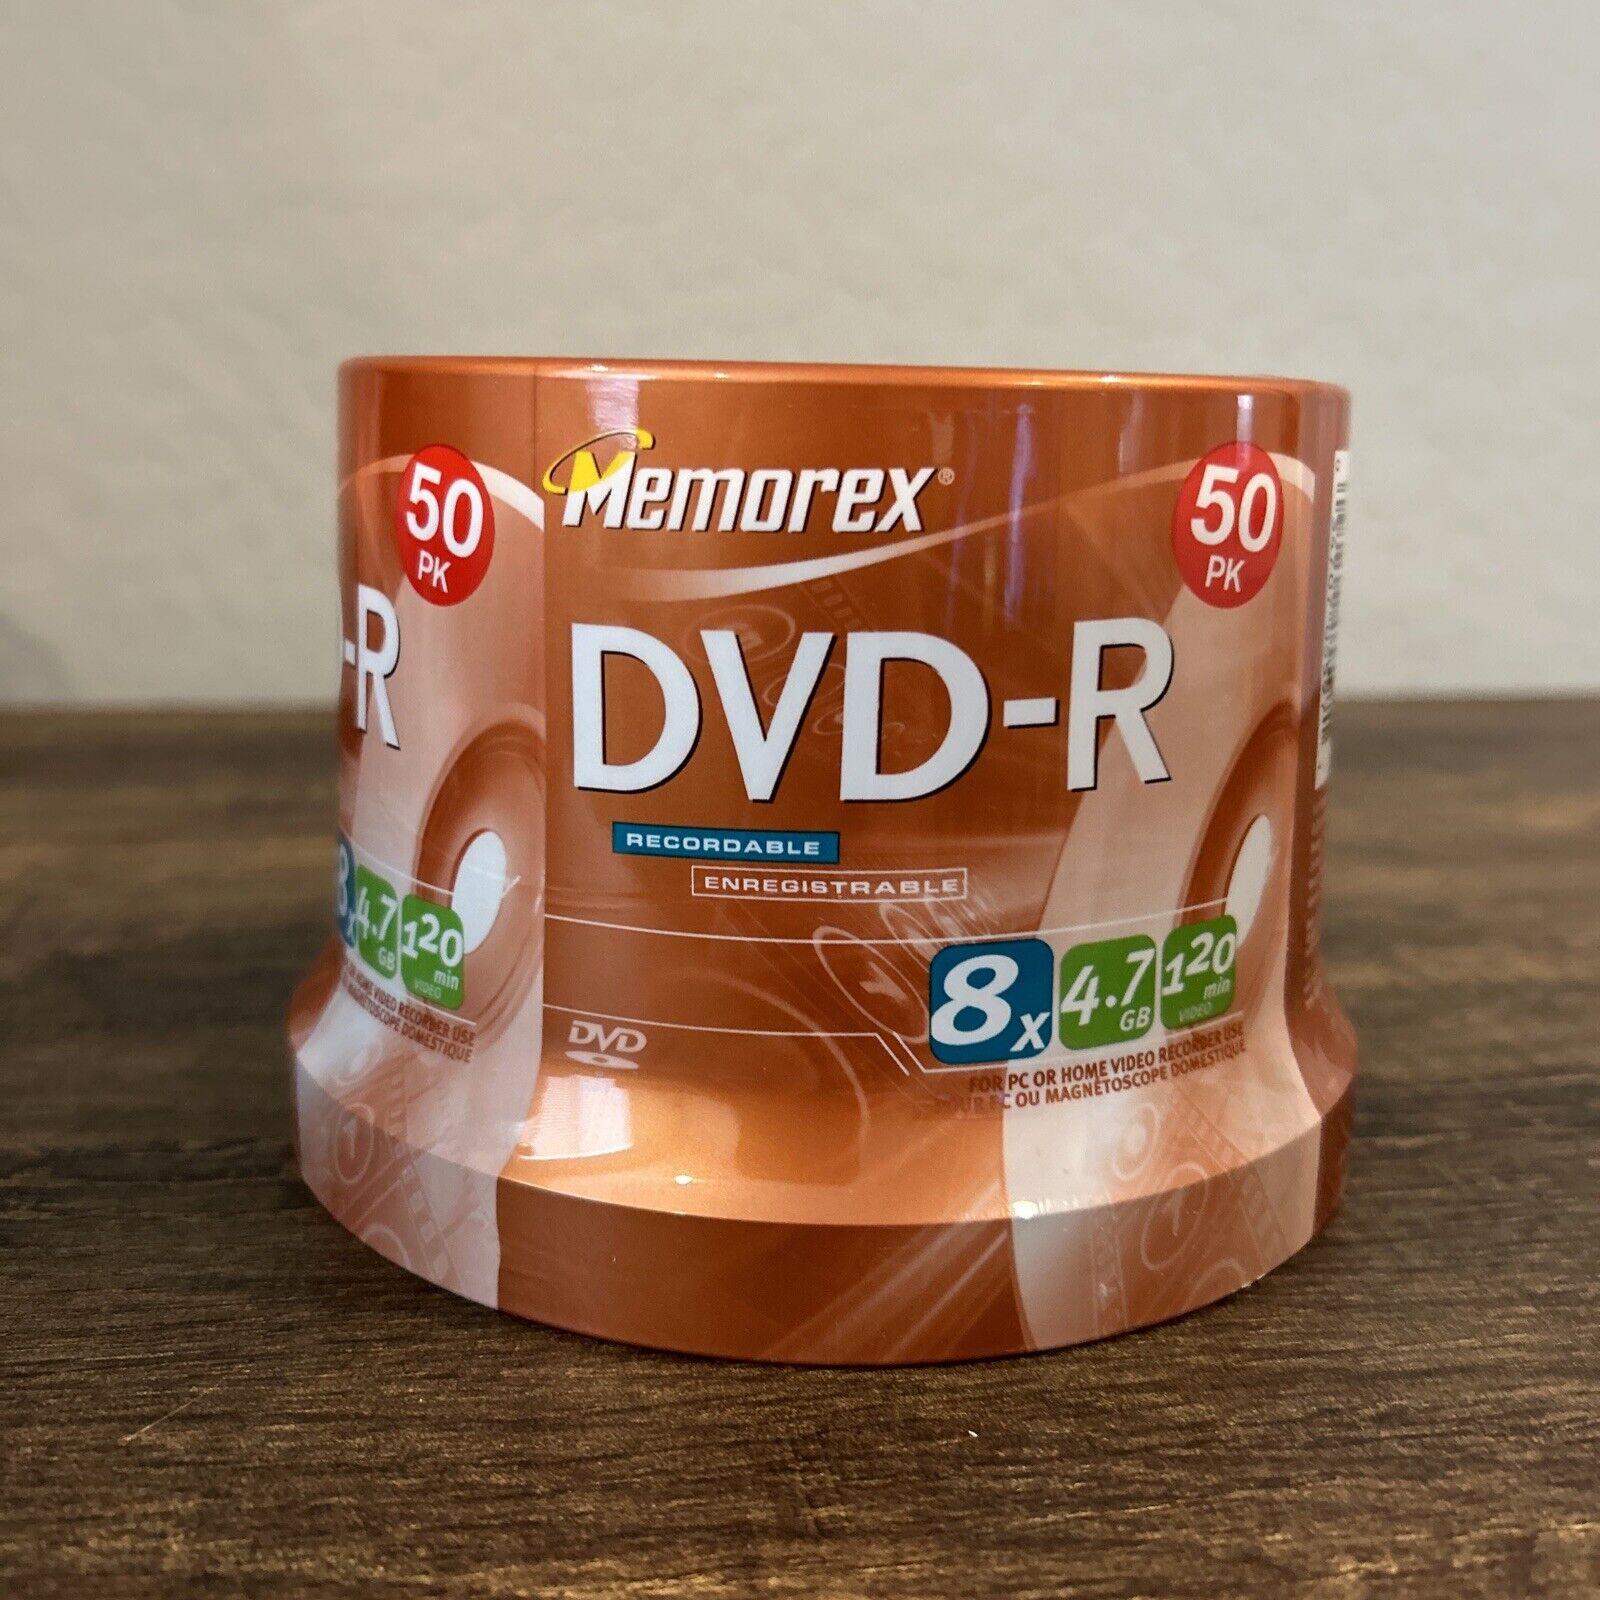 Memorex 50pk DVD-R 8x Speed Recordable 4.7 GB PC Home Video 120 Minutes Sealed